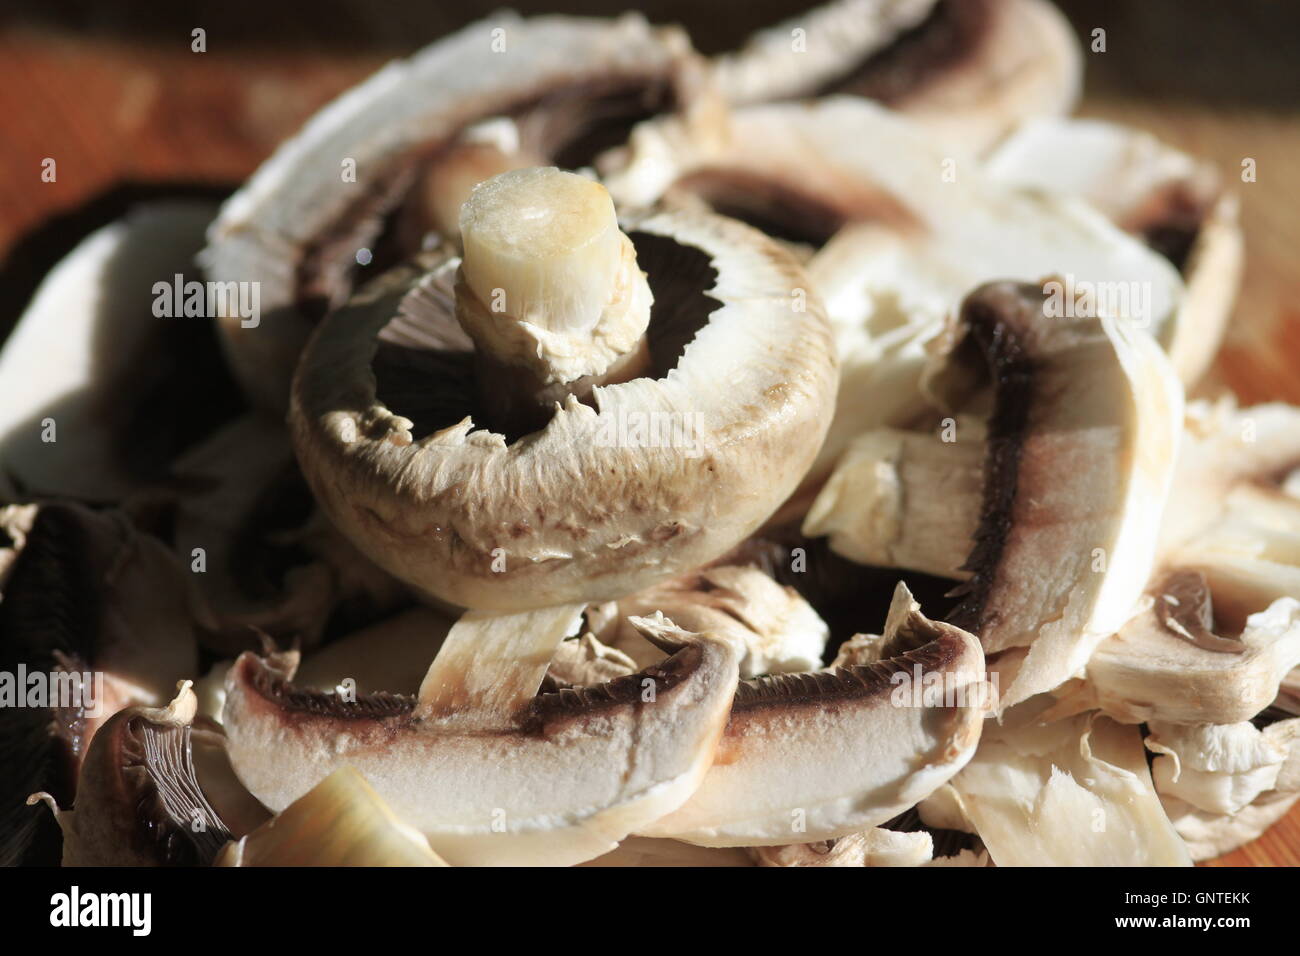 Food preparation - Sliced white mushrooms on wooden kitchen worktop waiting to be cooked. Stock Photo